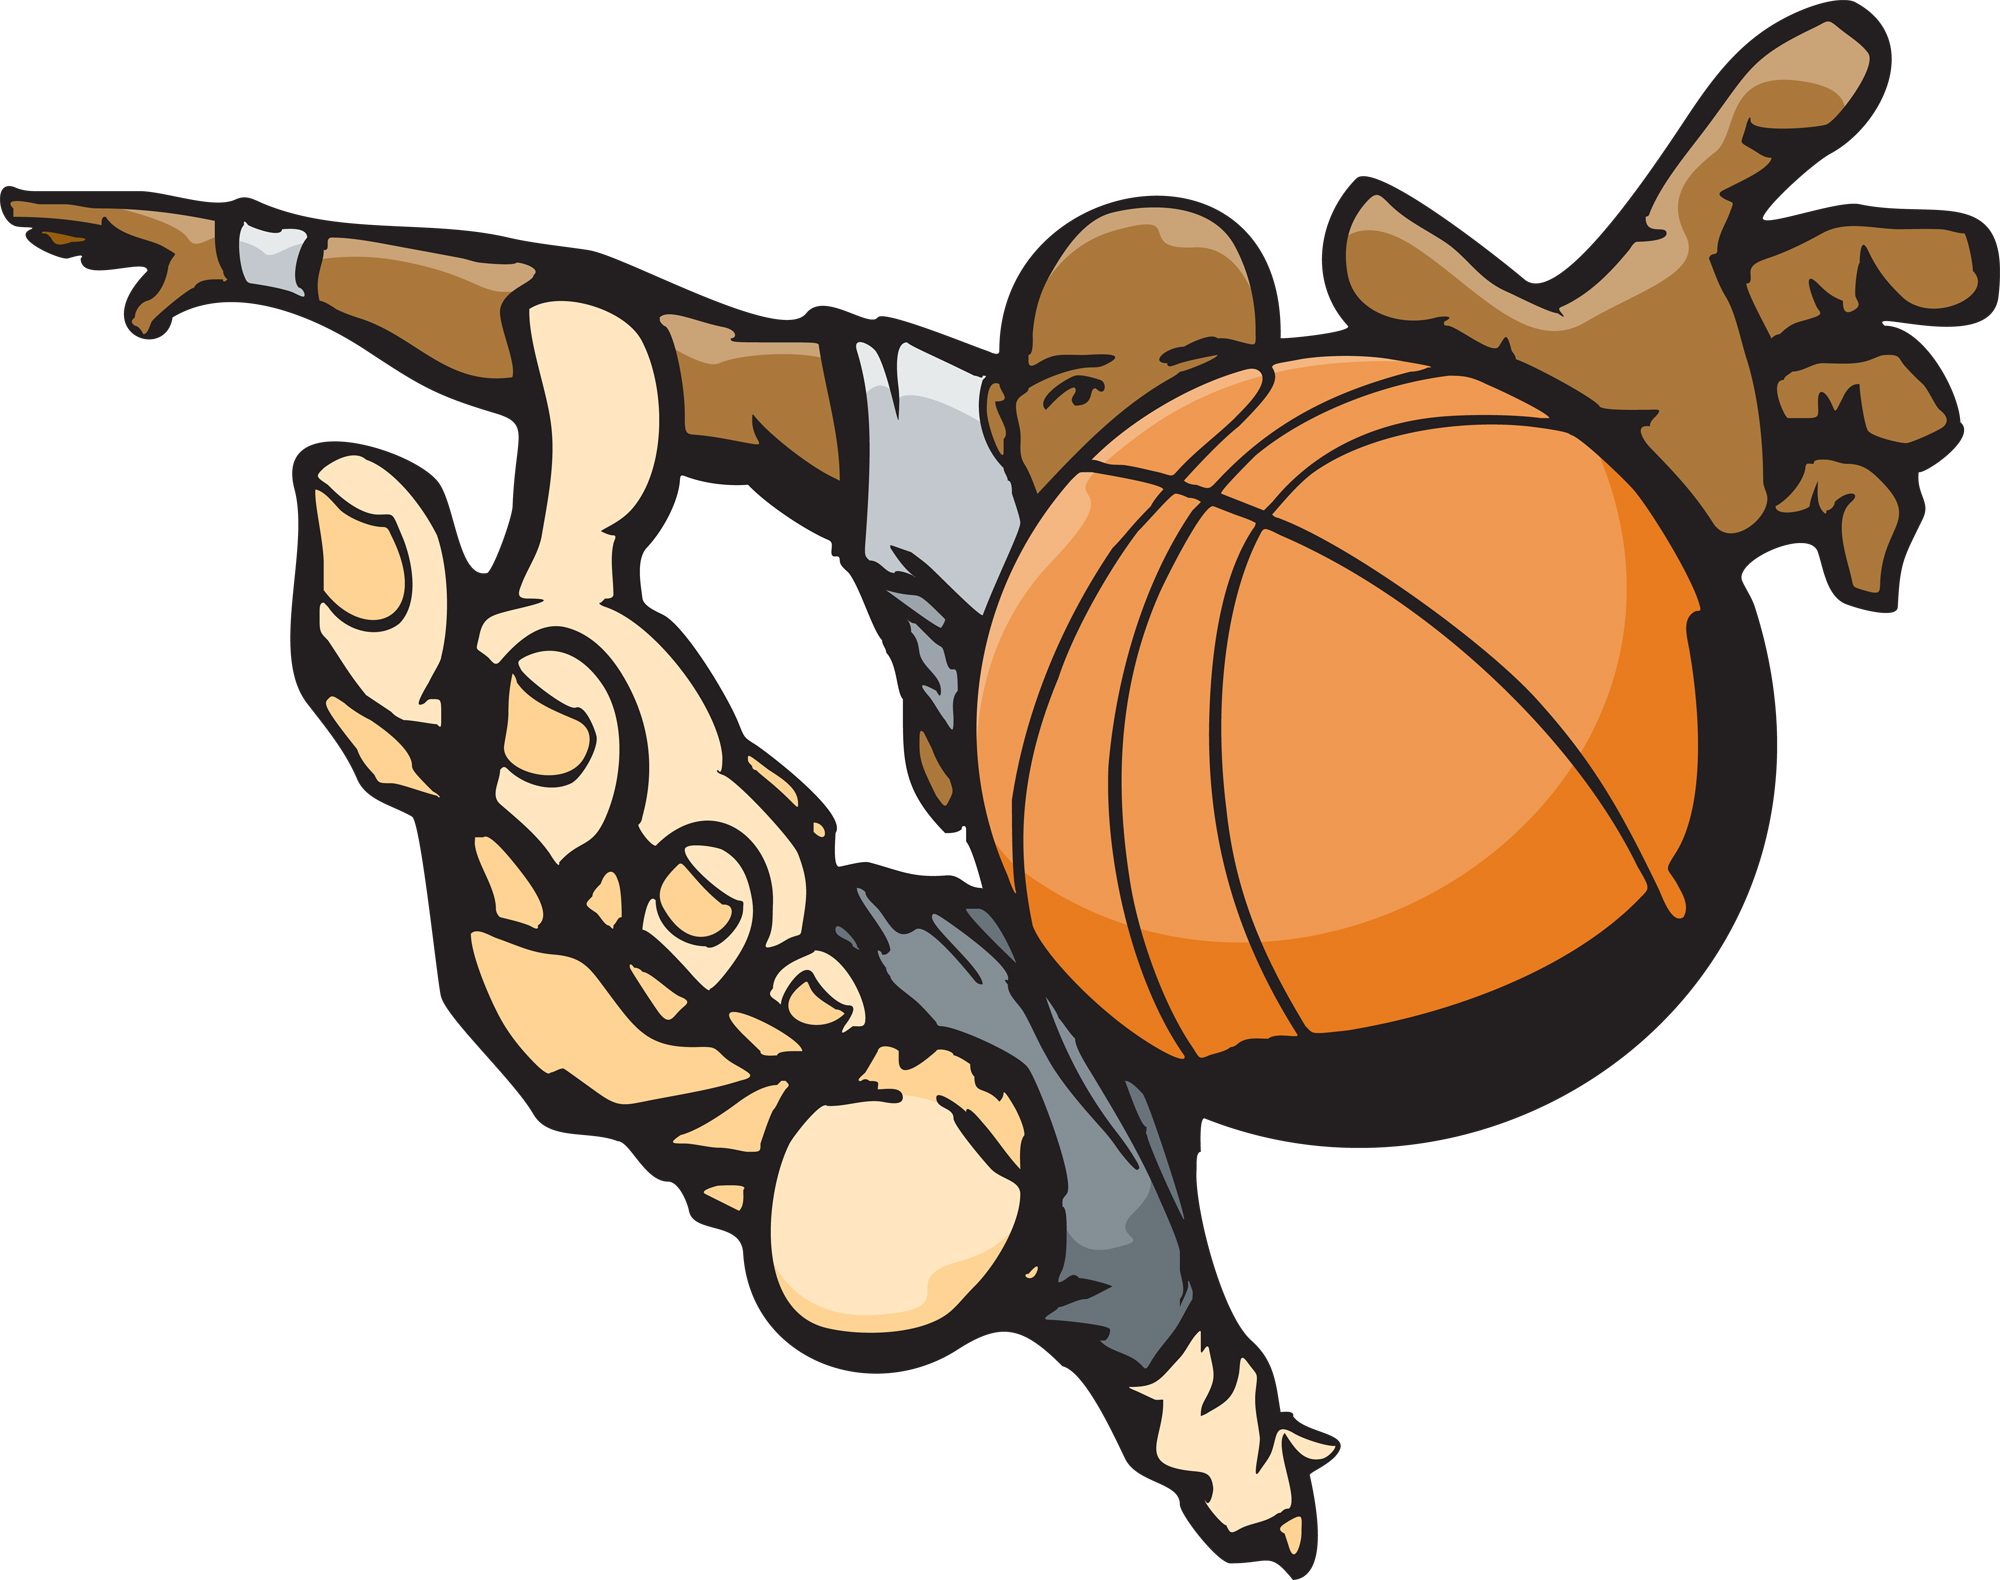 Basketball Clip Art - Images, Illustrations, Photos